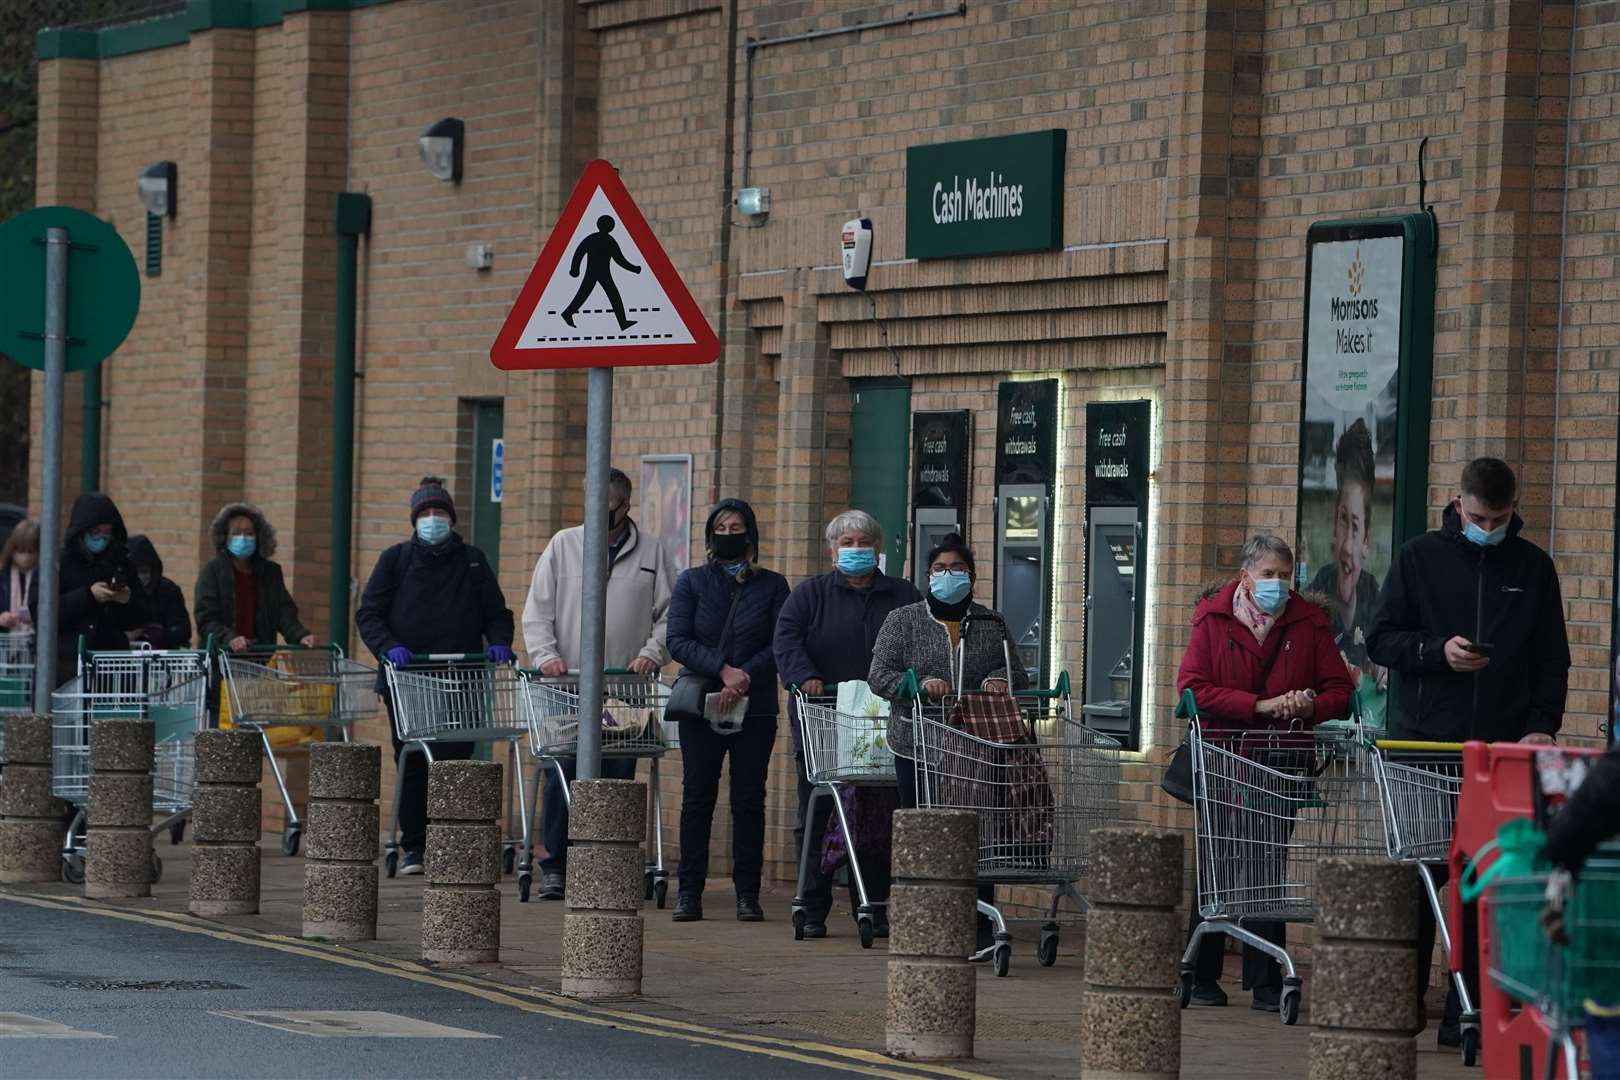 People queue outside a Morrisons supermarket in Whitley Bay, Tyne and Wear (Owen Humphreys/PA)